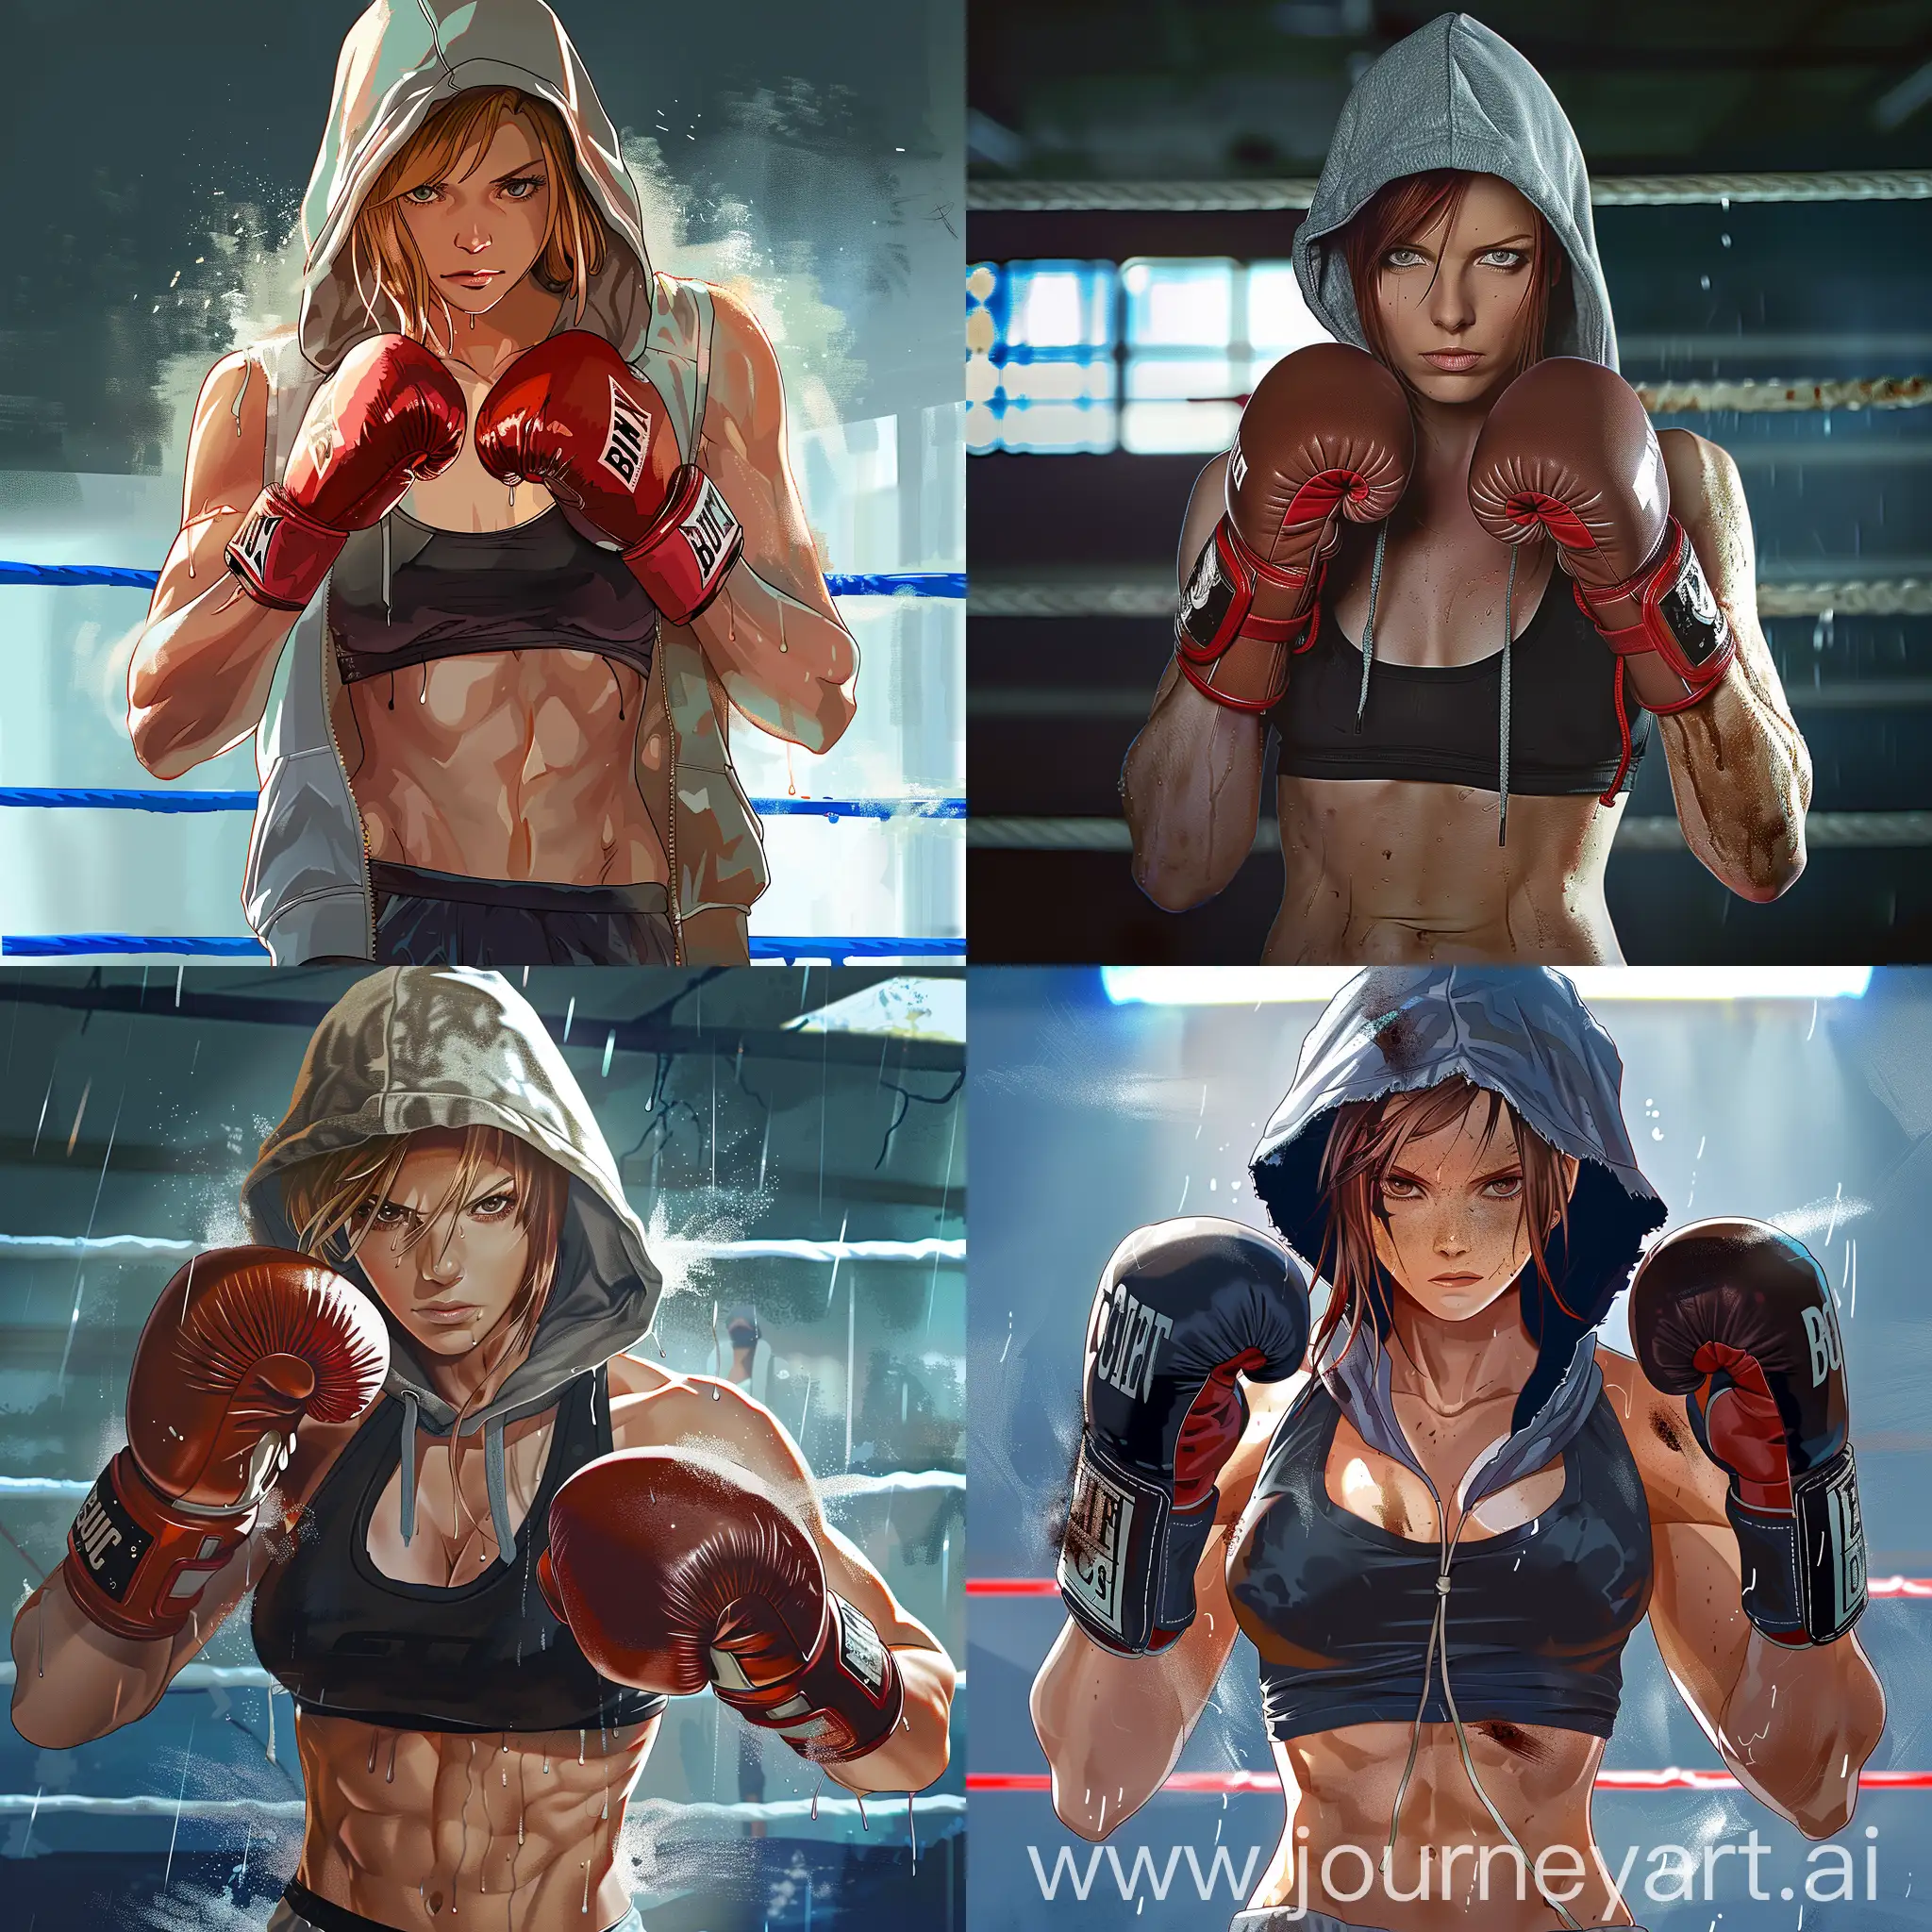 Handsome woman, sleeveles hoodie, abs, muscular, boxer, boxing gloves, sweating